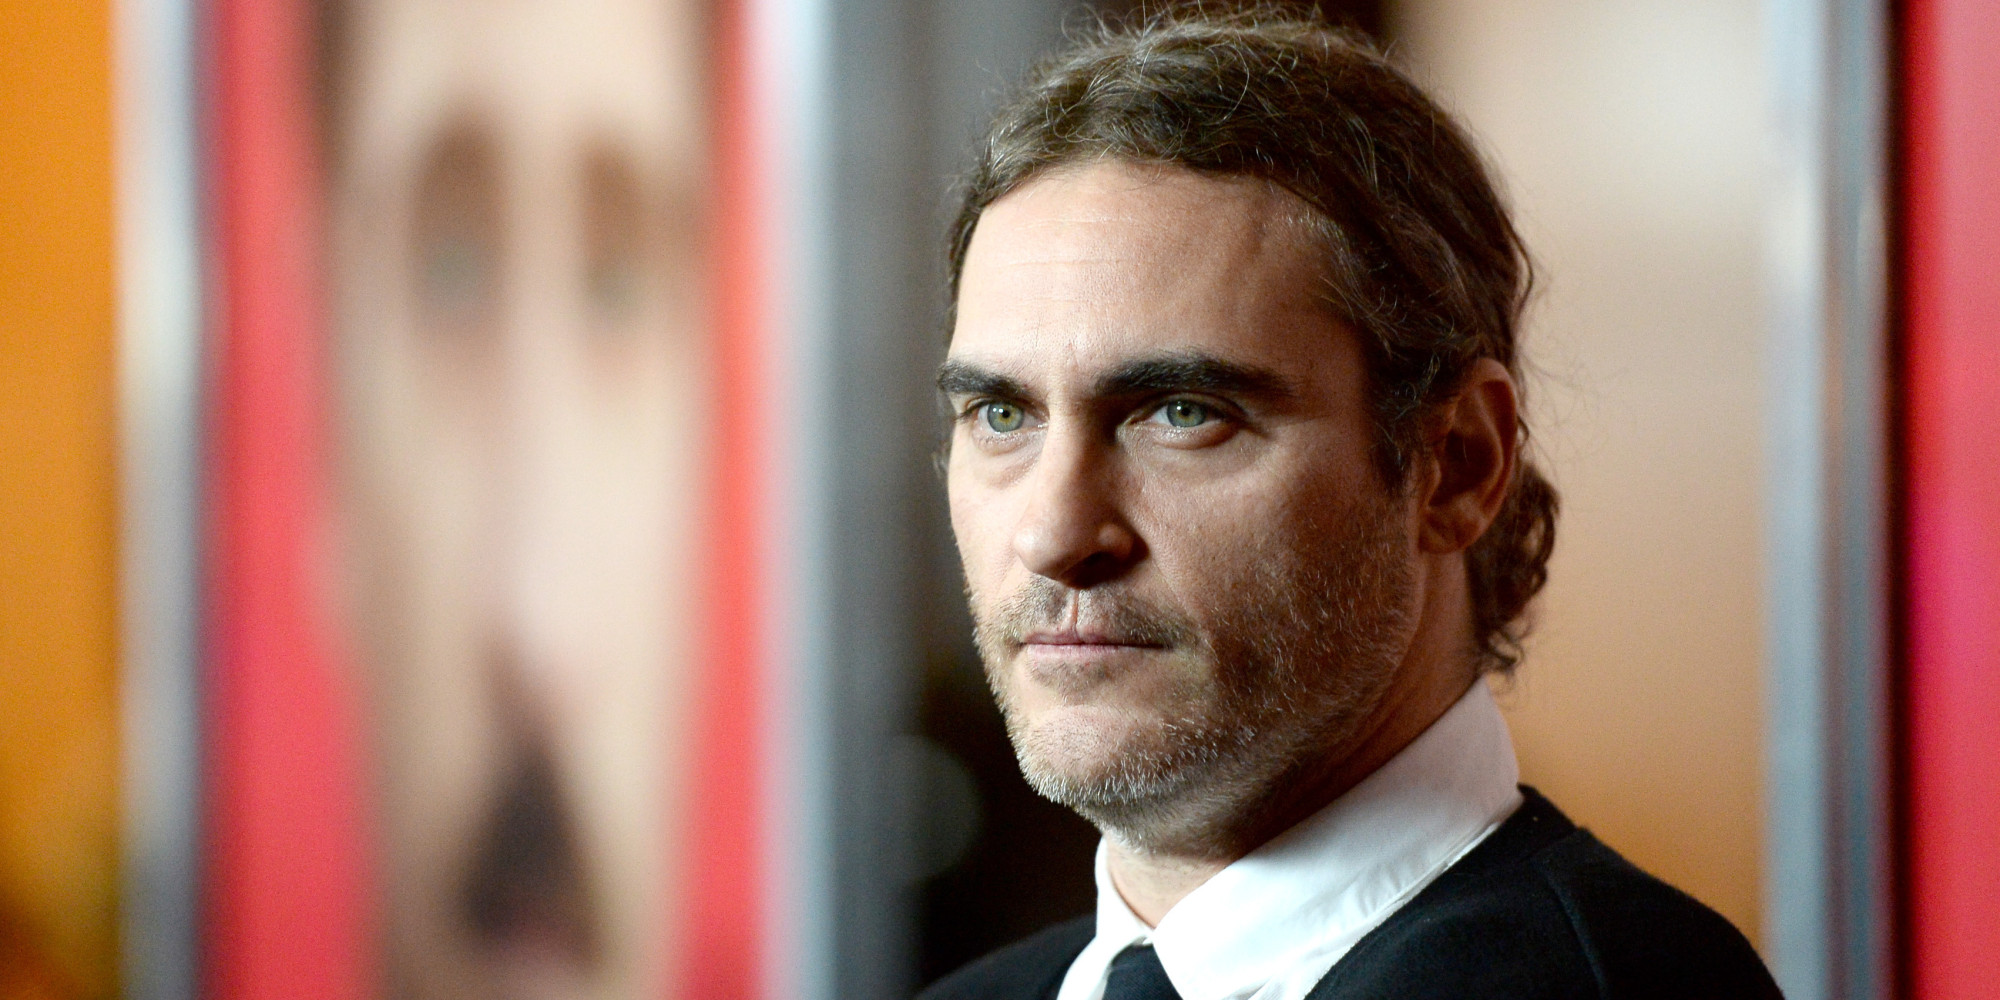 Go Ahead, Stare At Joaquin Phoenix's Forehead. Yup, You See It Now. | HuffPost